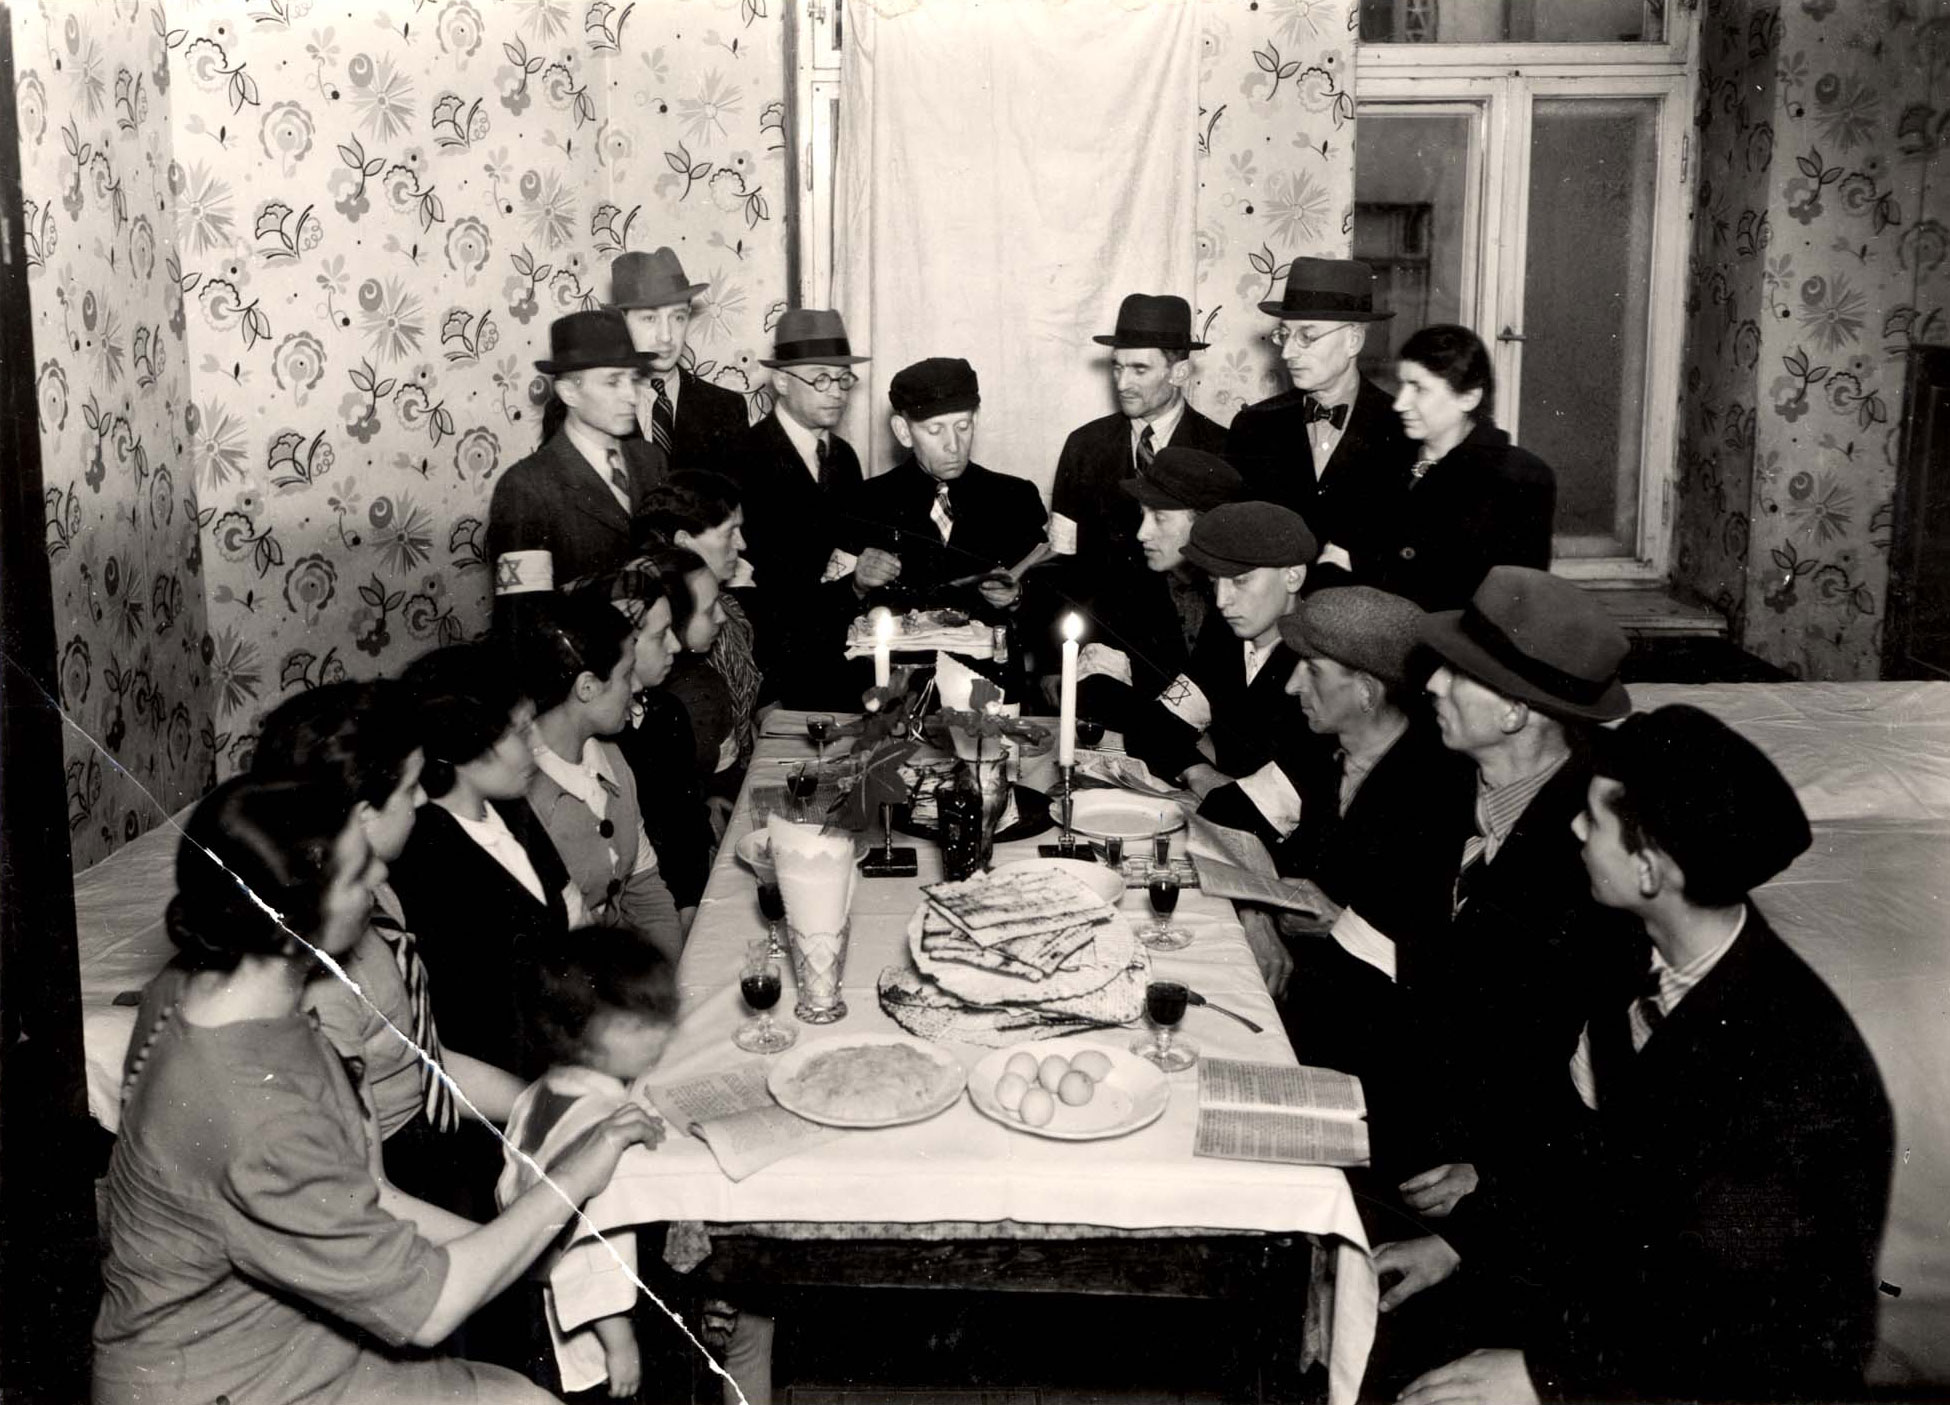 Jews around a Seder table reading from the Passover Haggada, Warsaw, Poland